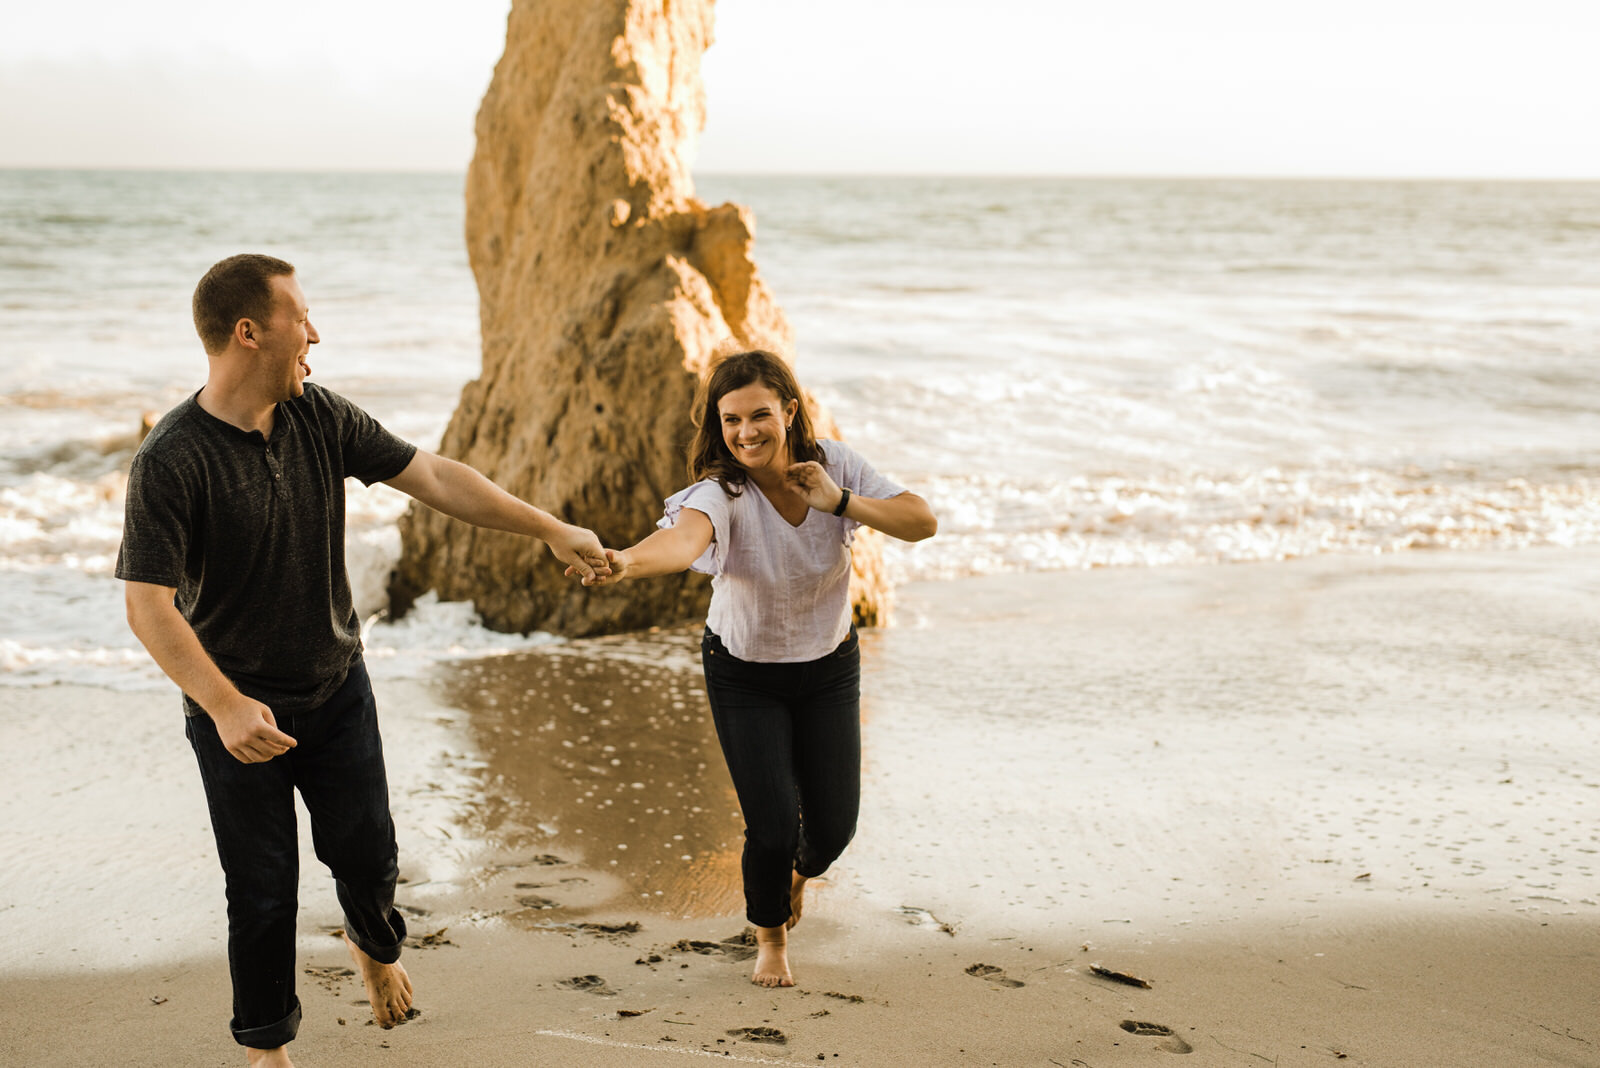 Happy, goofy beach engagement photo | fun, nontraditional wedding photos by California Elopement Photographer Planner Kept Record | www.keptrecord.com